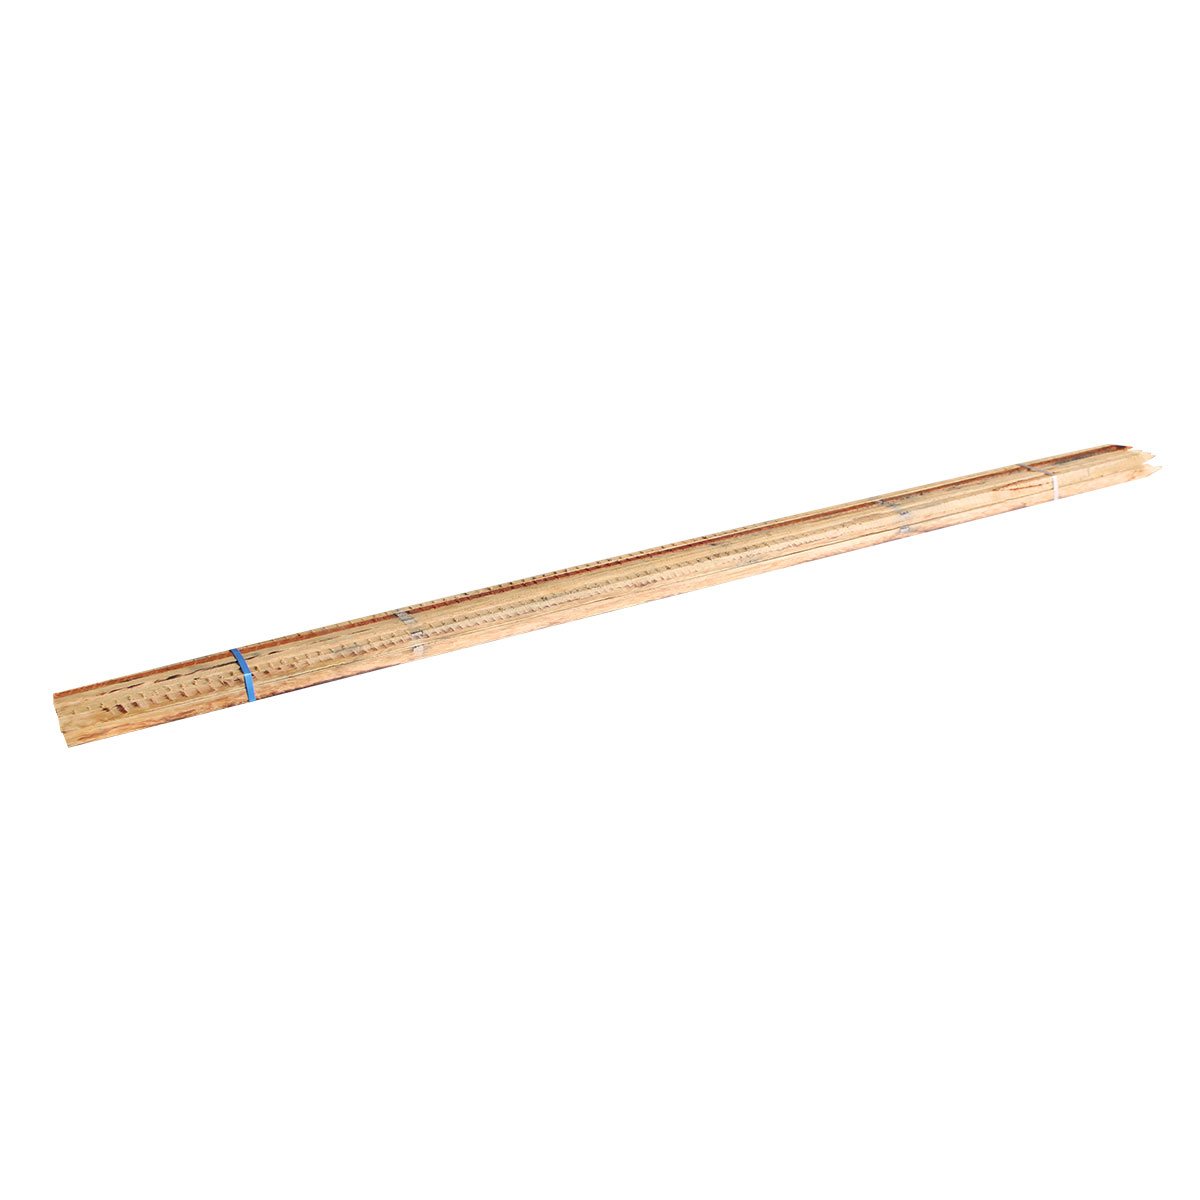 Hardwood Stakes 25 x 25 x 2100mm - 10 Pack